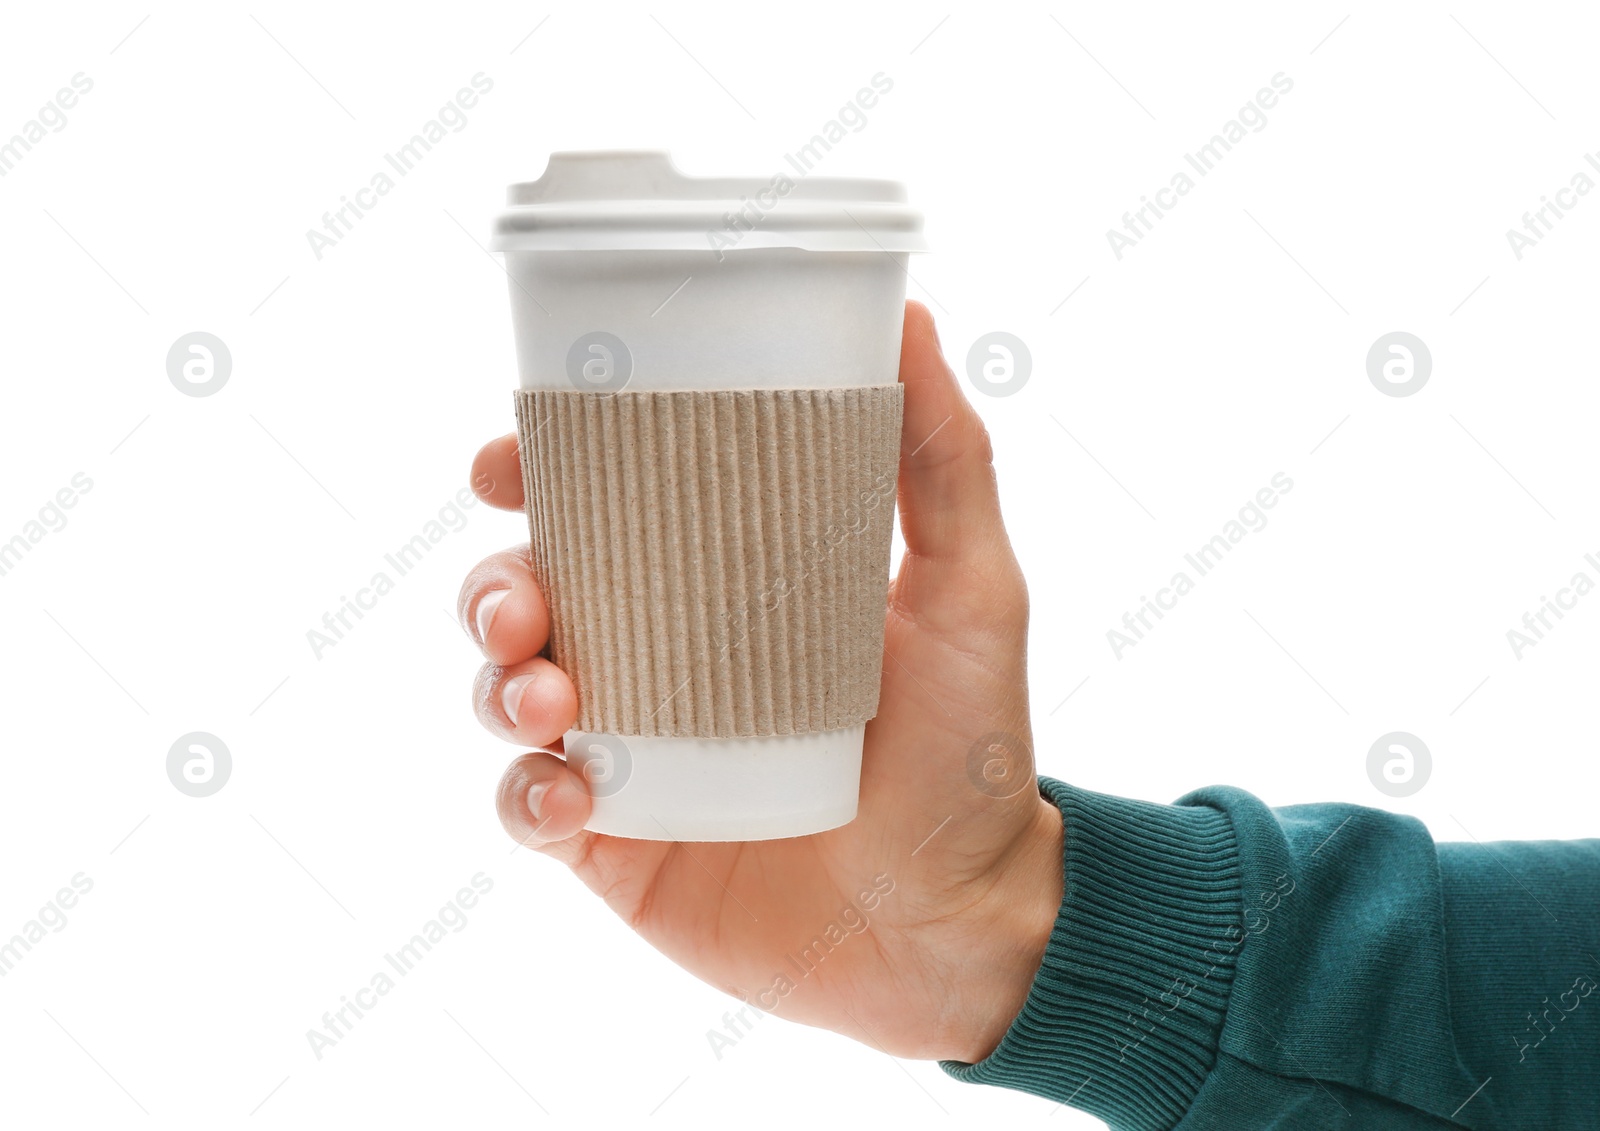 Photo of Man holding takeaway paper coffee cup with cardboard sleeve on white background